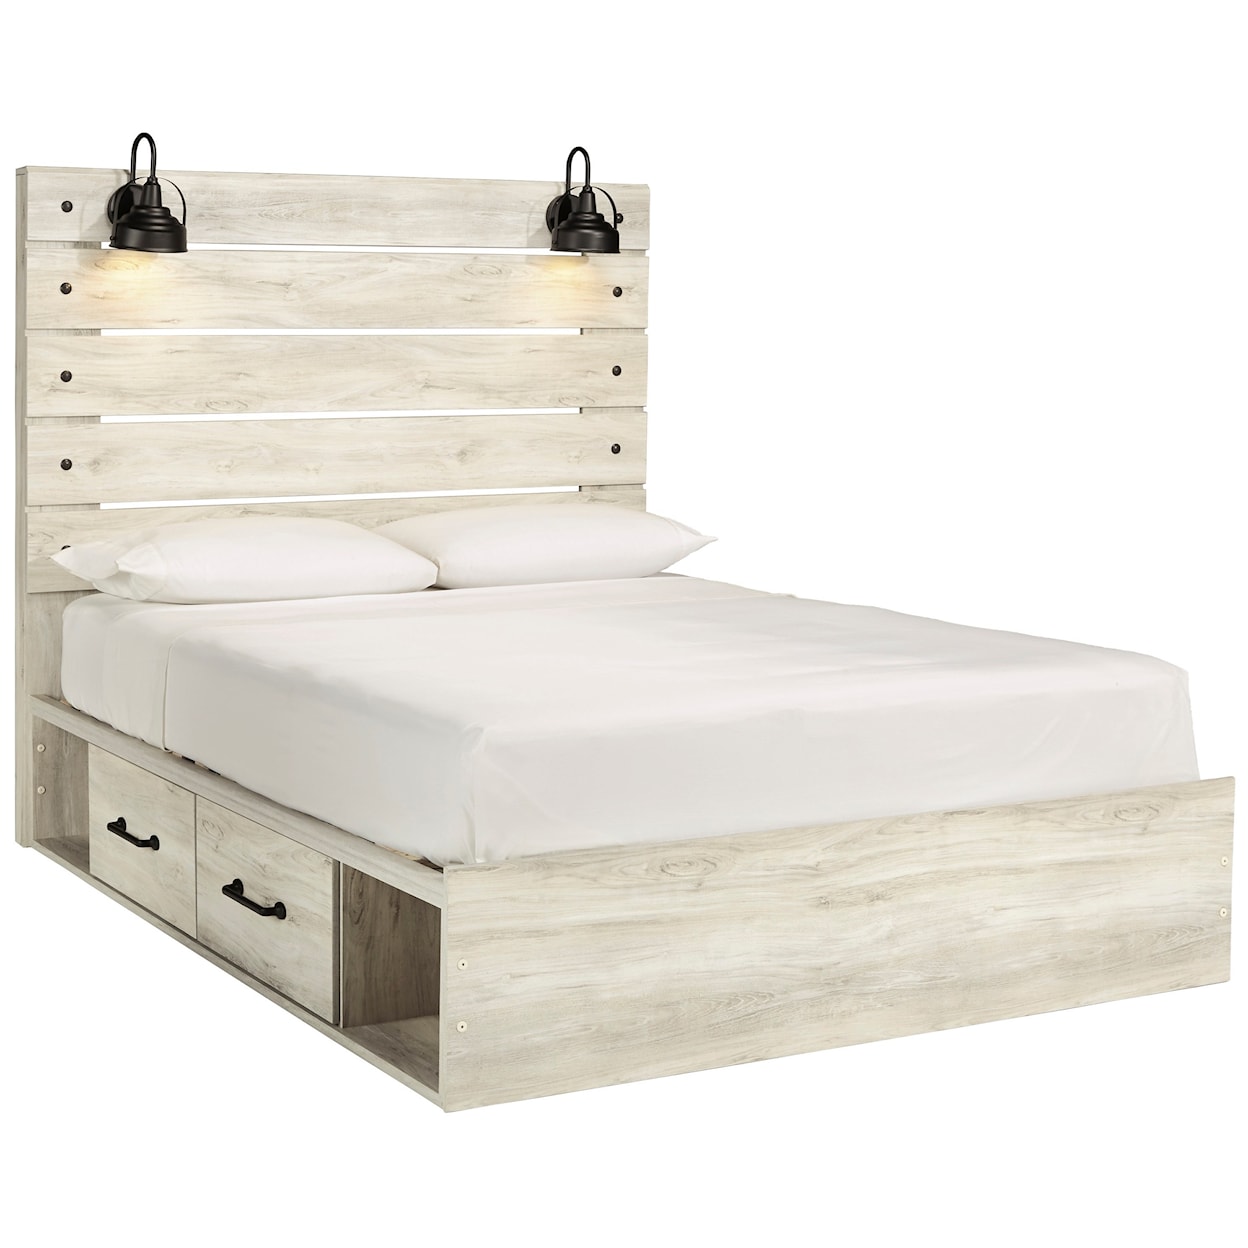 Ashley Furniture Signature Design Cambeck Queen Storage Bed with 4 Drawers